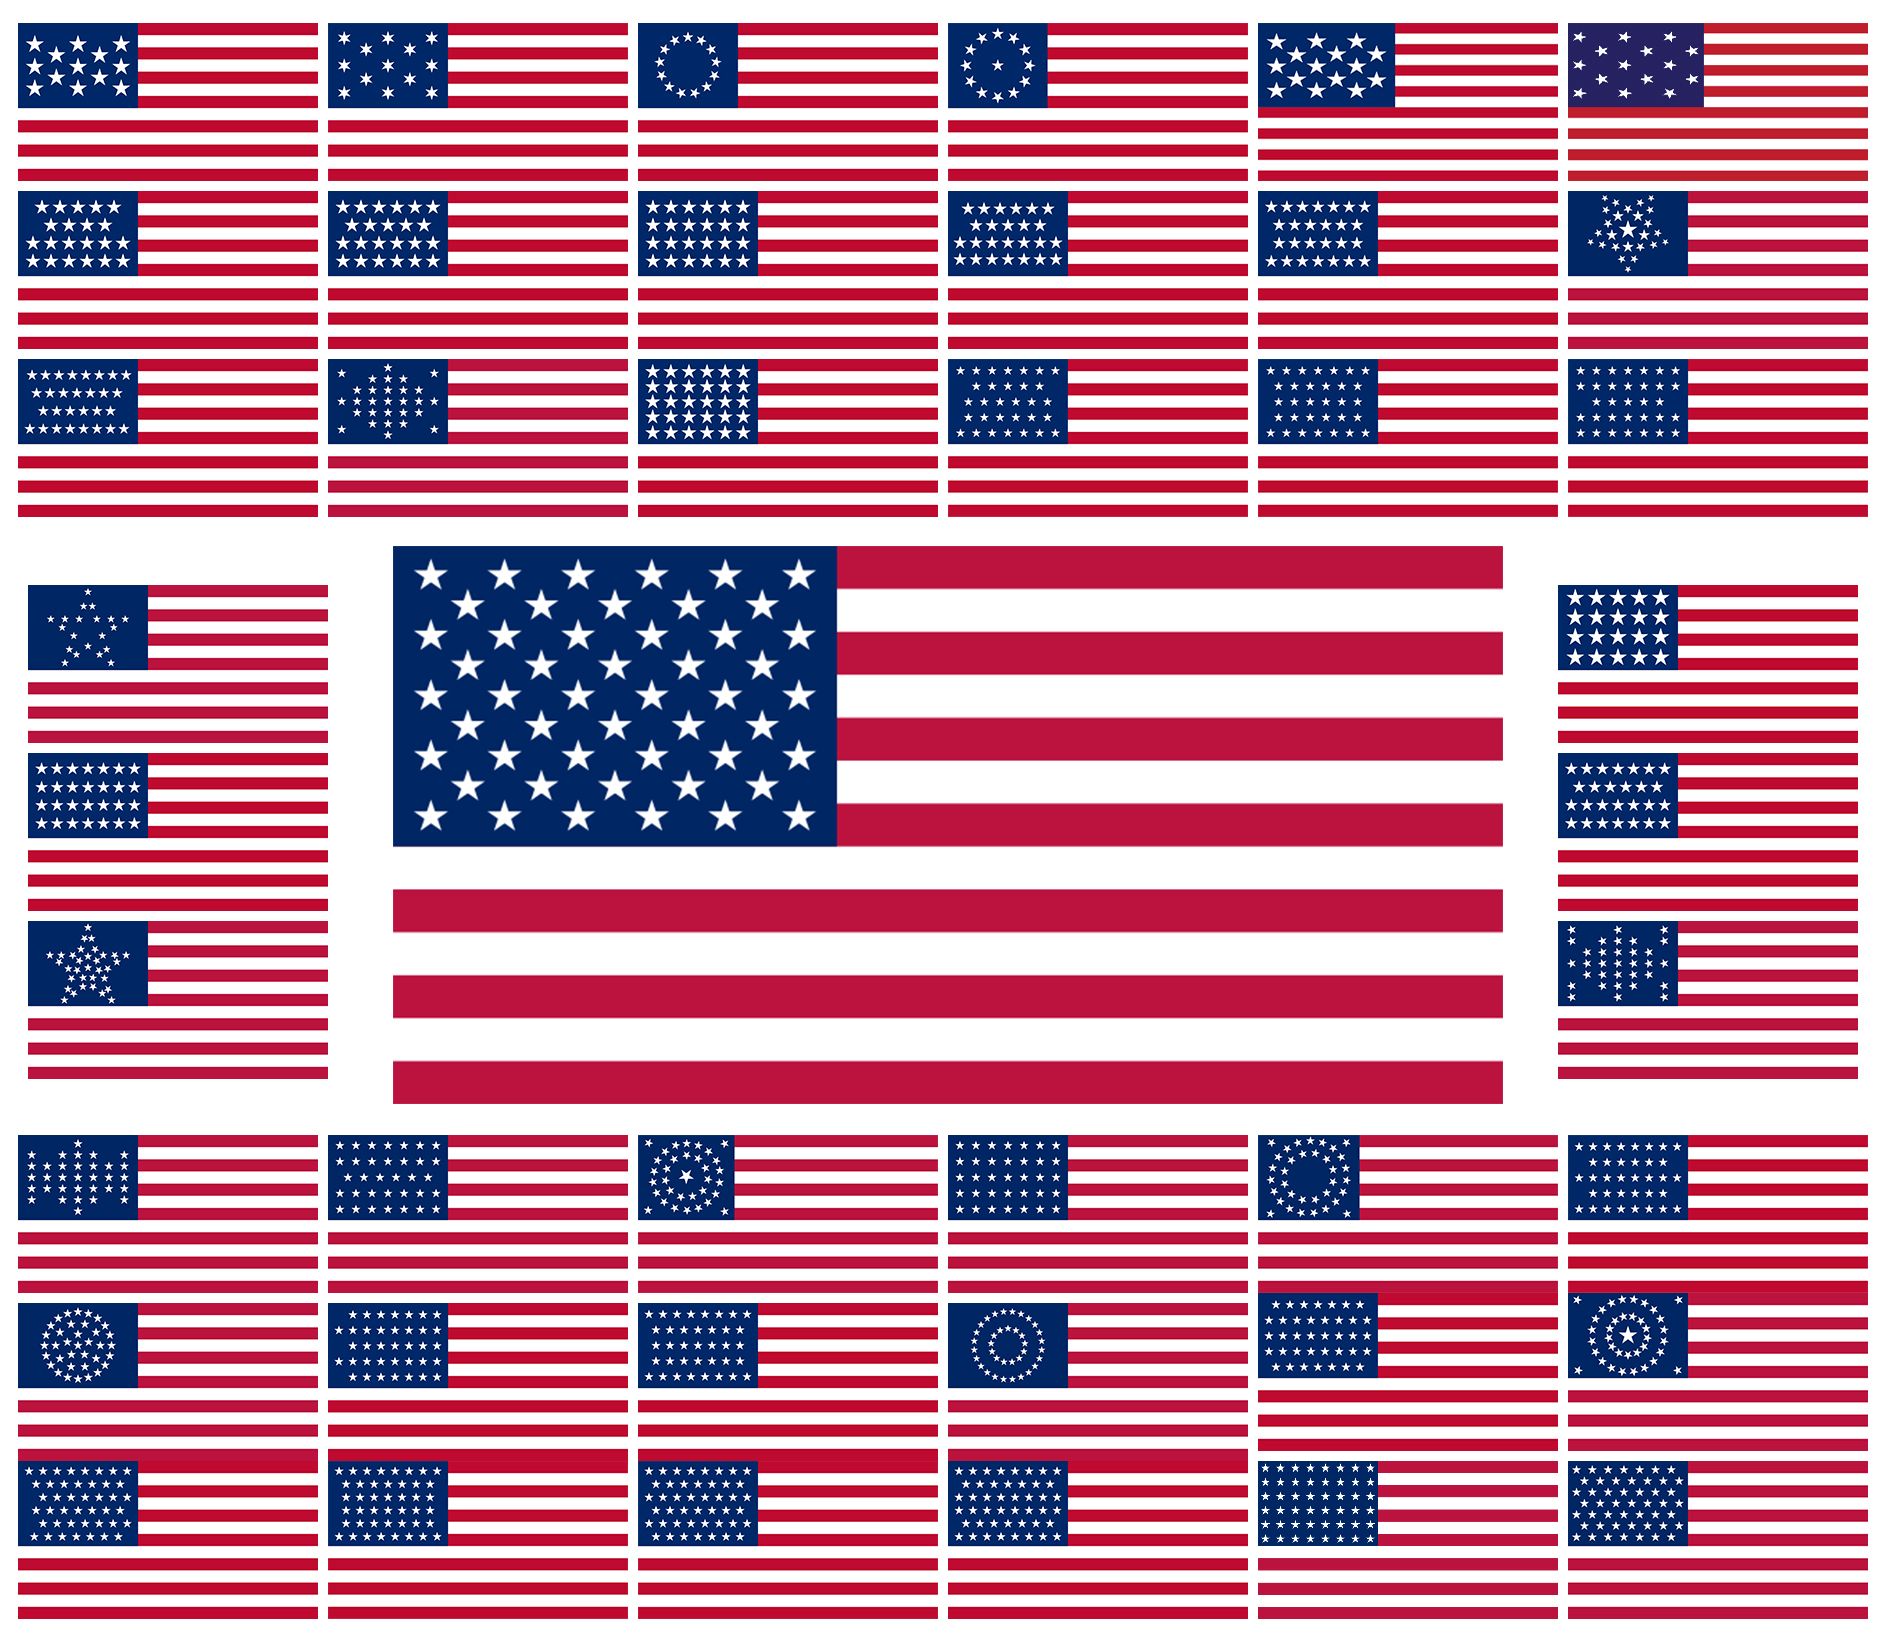 American flags over the years